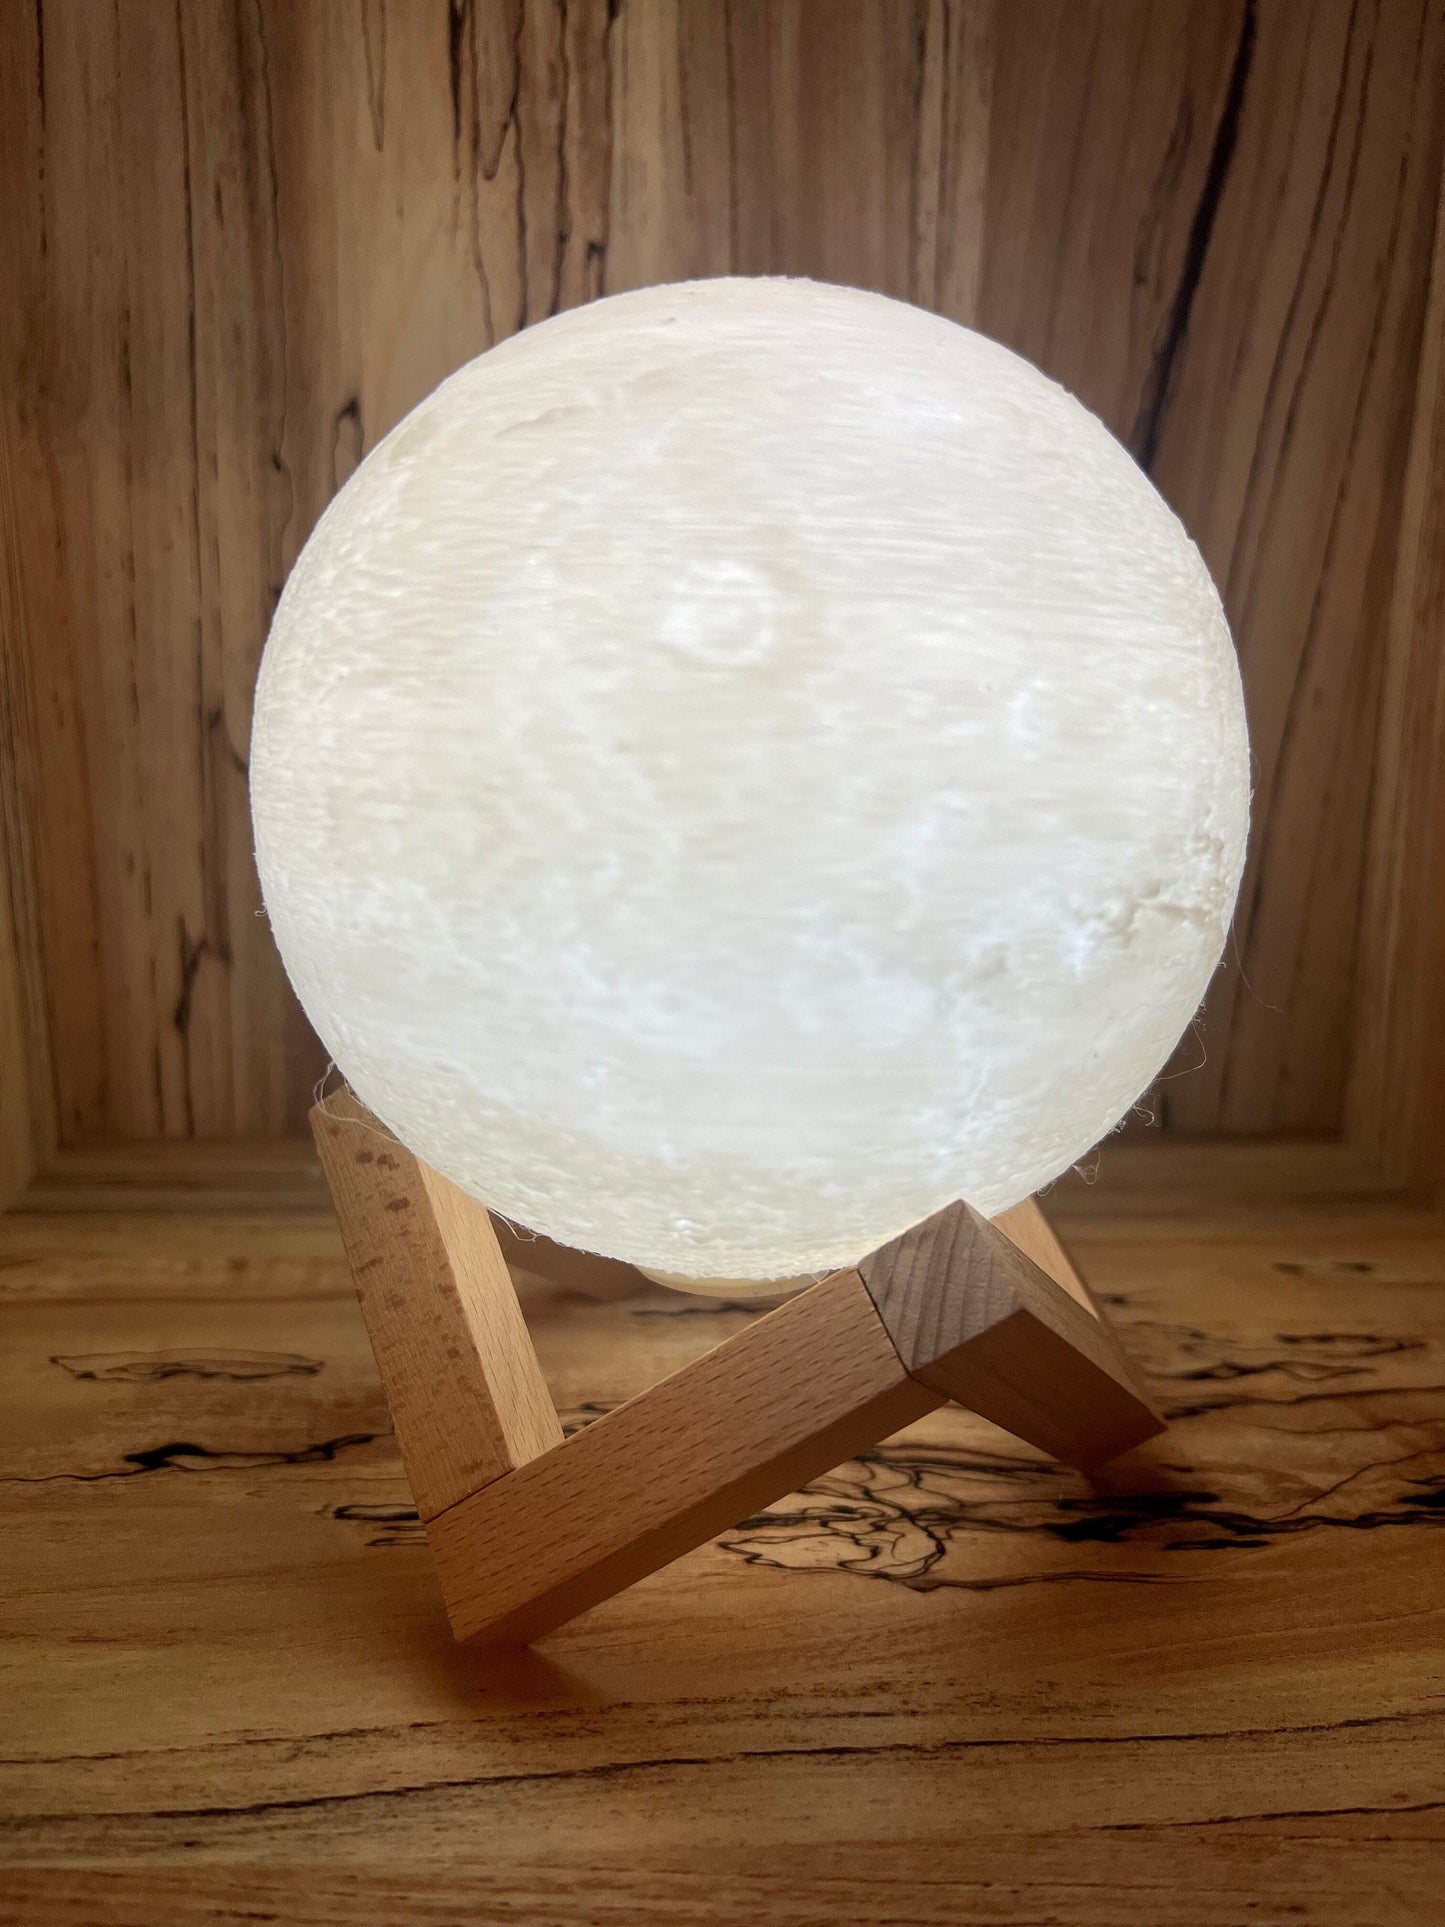 Planet Lamp globe, 16 Color Changing LED, Remote and Touch Control, 6.5-inch diameter, Rechargeable, Wooden Stand Included